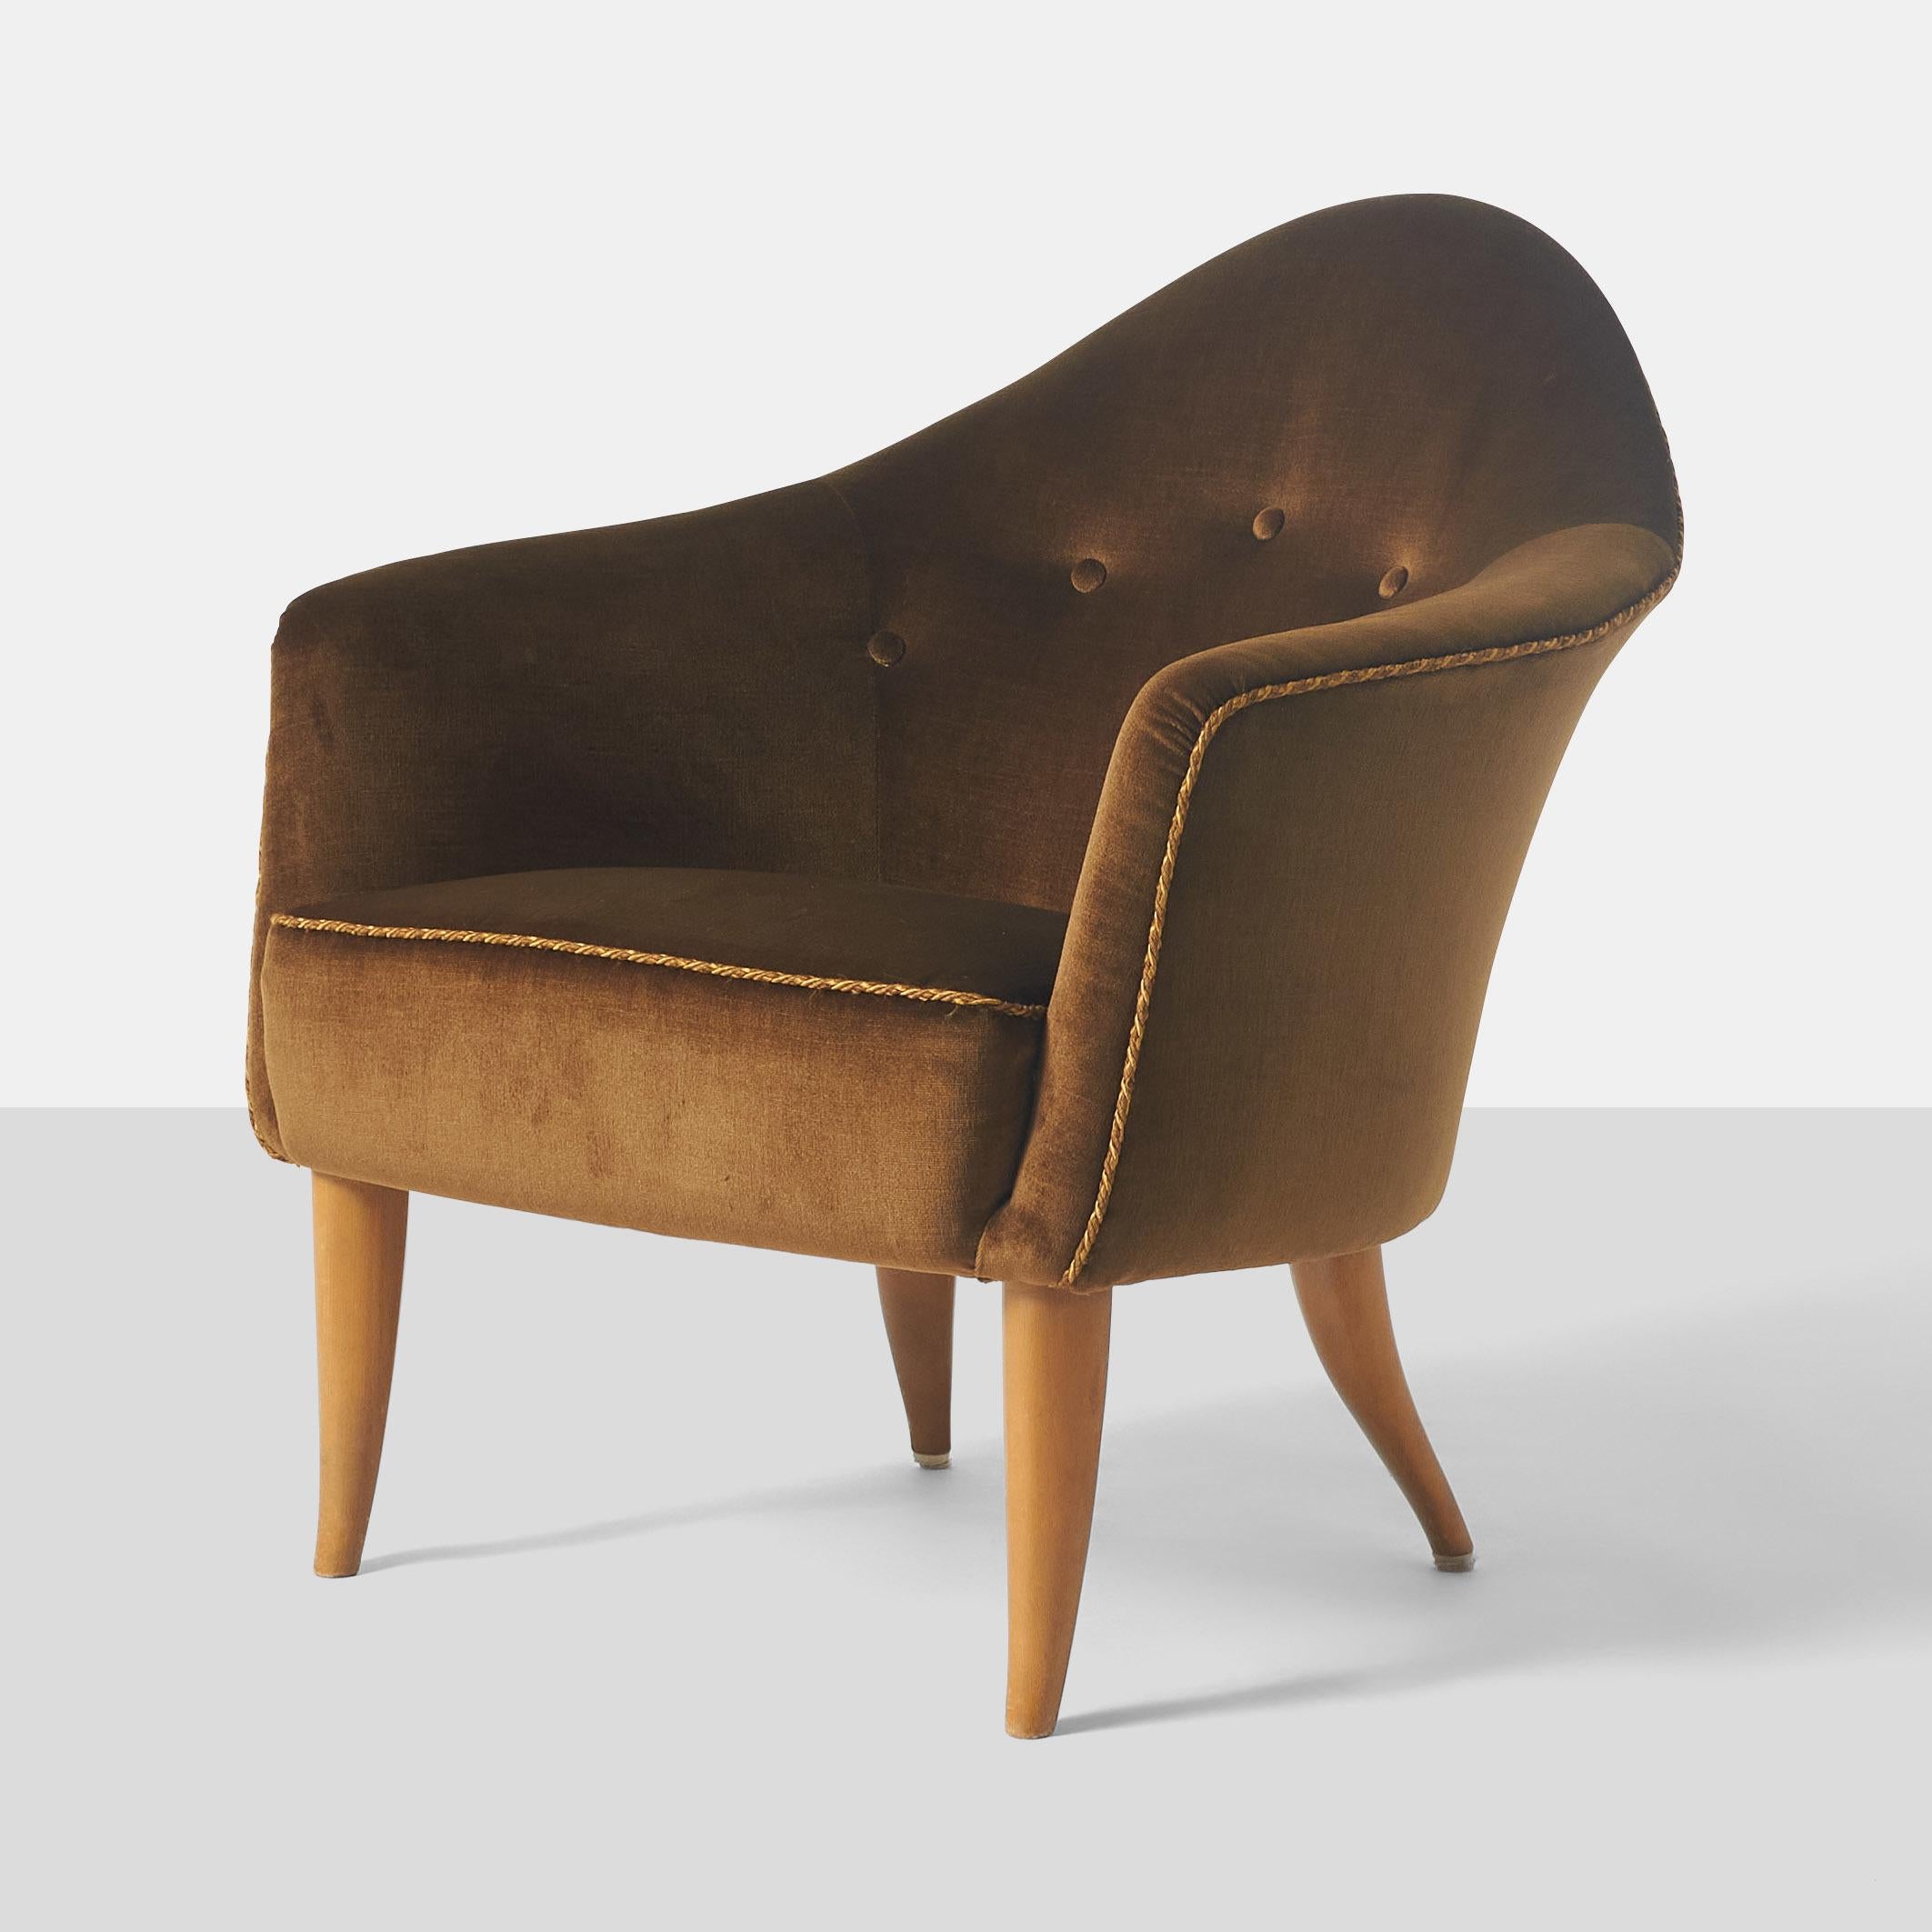 A tufted low back  lounge chair from the Paradise collection by Kerstin Horlin-Holmquist for Nordiska Kompaniet with beech legs and upholstered in a brown fabric and twisted cord trim detail along the seat and back edges. Marked on underside with a